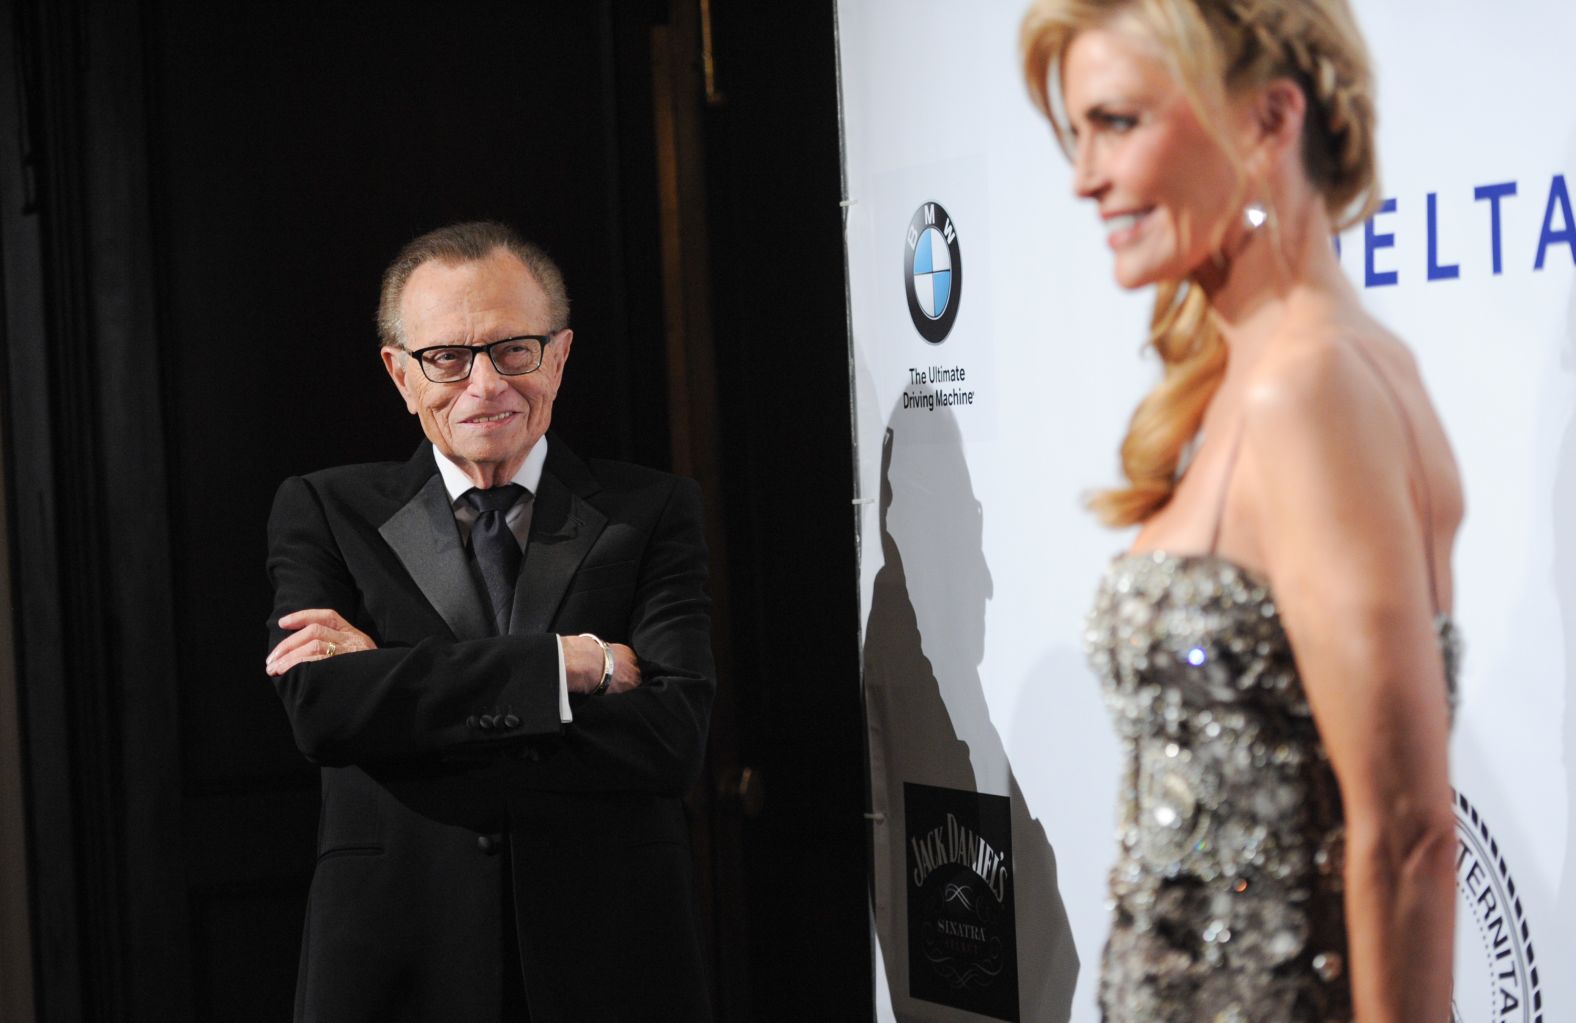 King watches his wife, Shawn, at a red-carpet event in 2014.